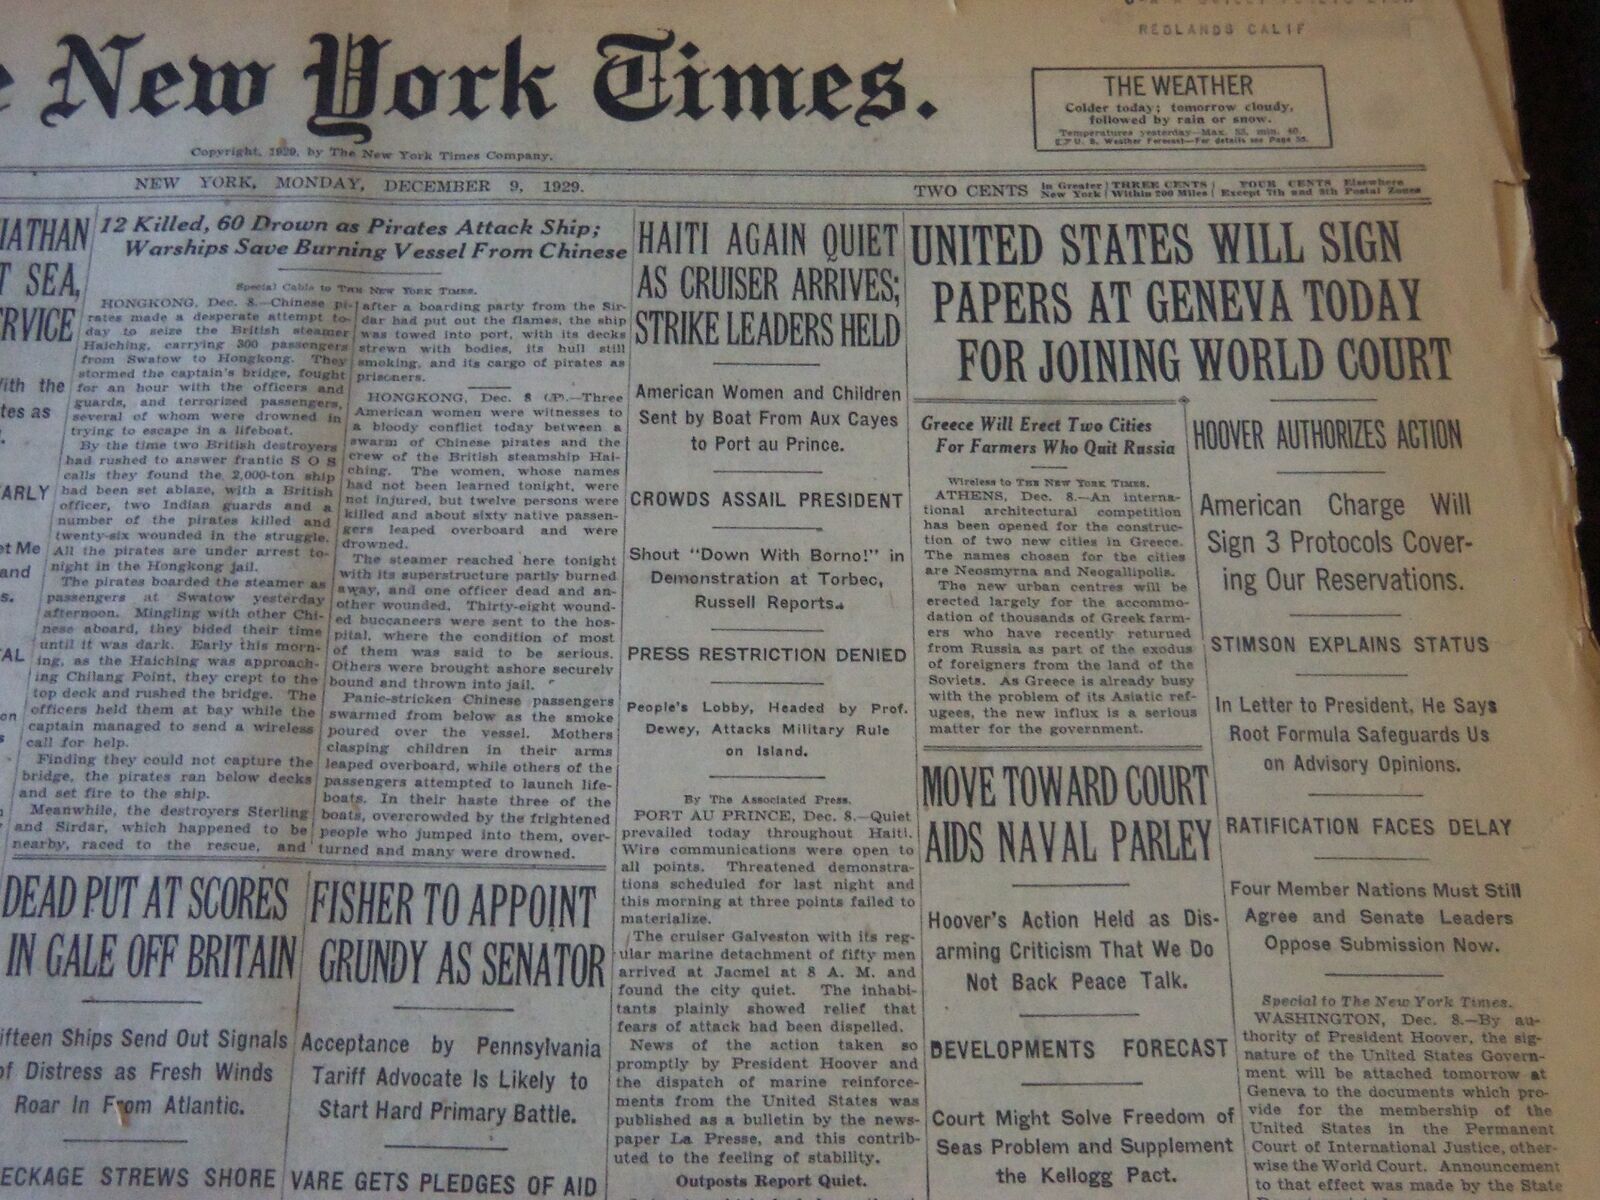 1929 DEC 9 NEW YORK TIMES - U. S. WILL SIGN PAPERS AT GENEVA TODAY - NT 6563